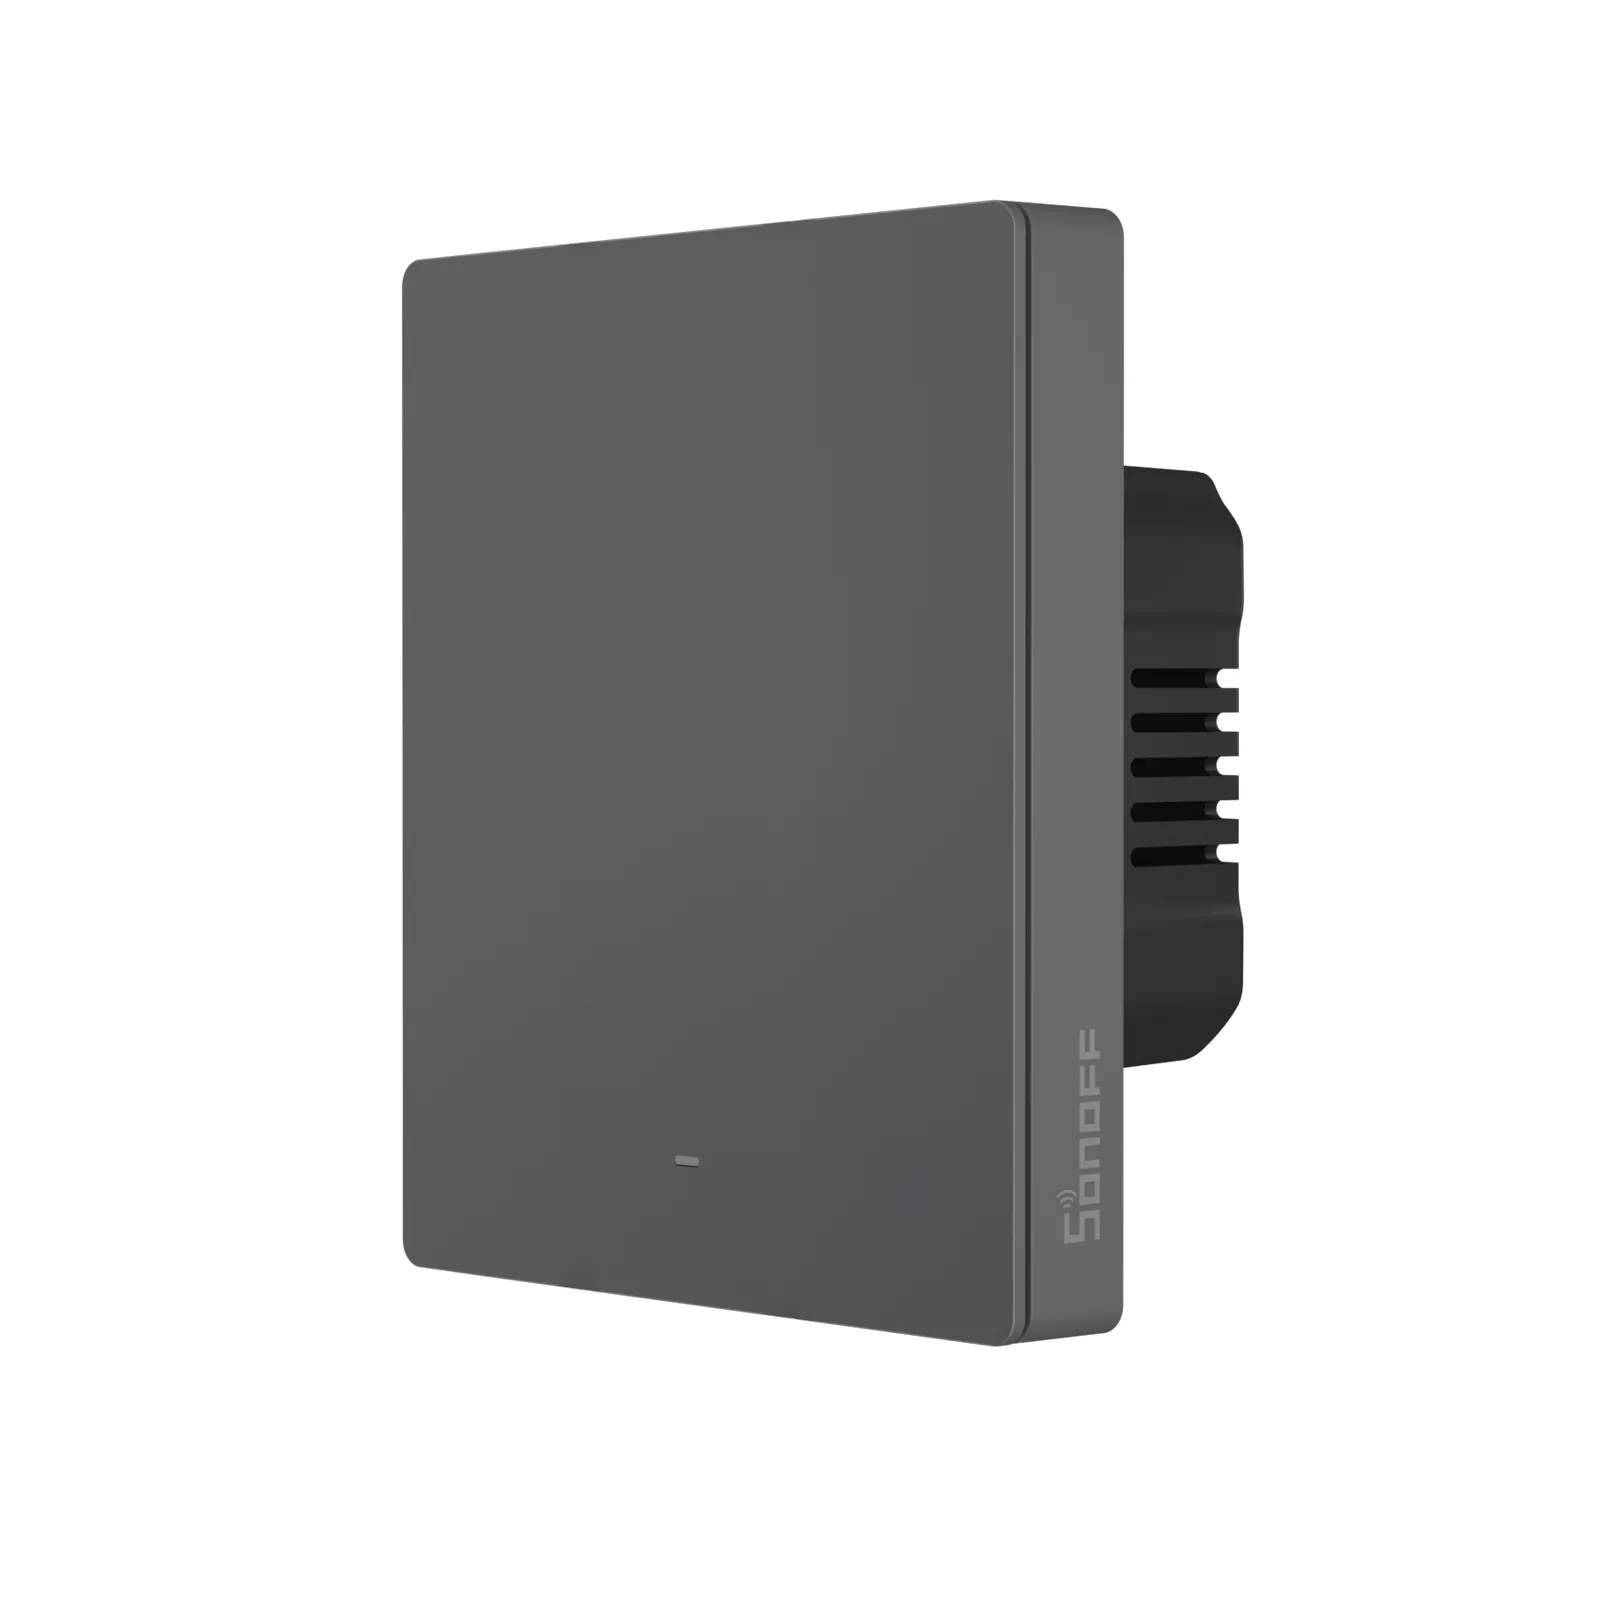 Find SONOFF M5 80 SwitchMan Smart Wall Switch APP Control Work with Alexa Google Home and Siri shortcut for Sale on Gipsybee.com with cryptocurrencies